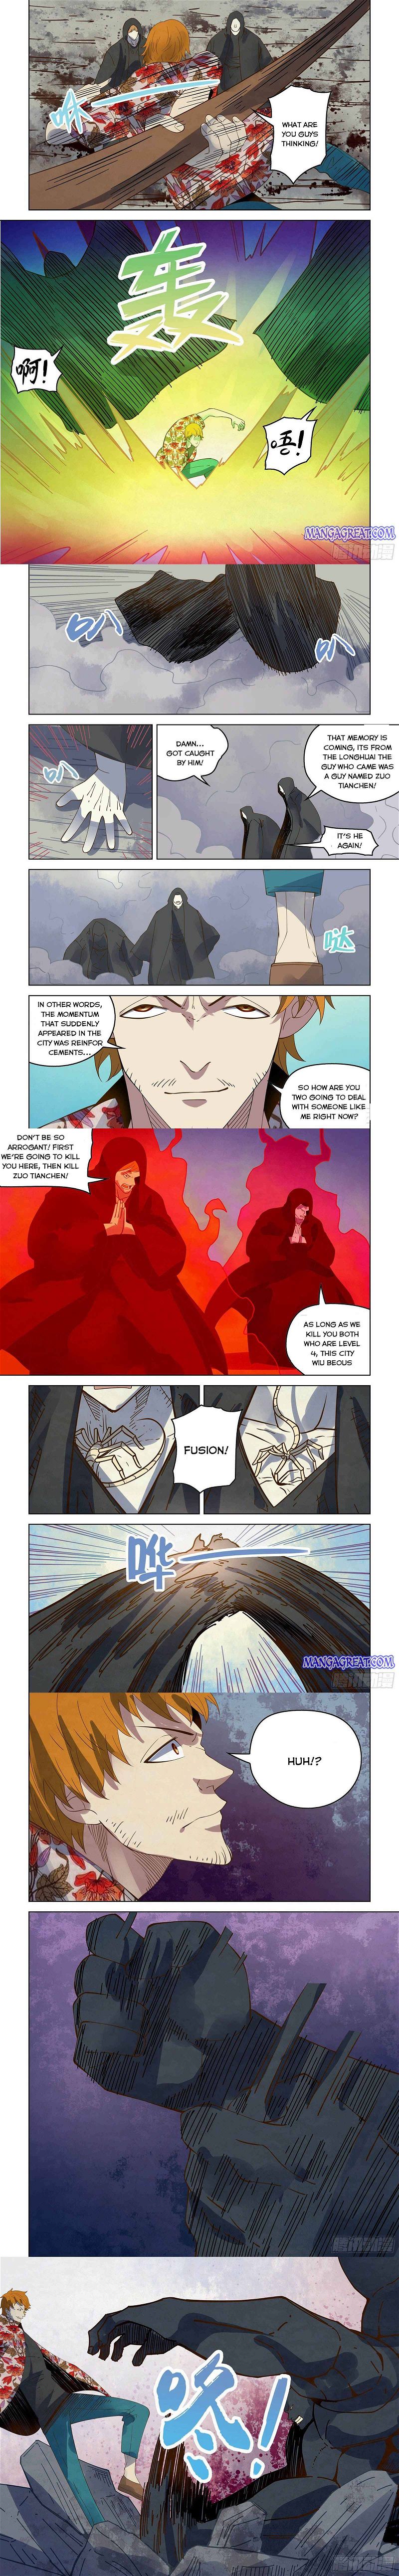 The Last Human Chapter 361 page 2